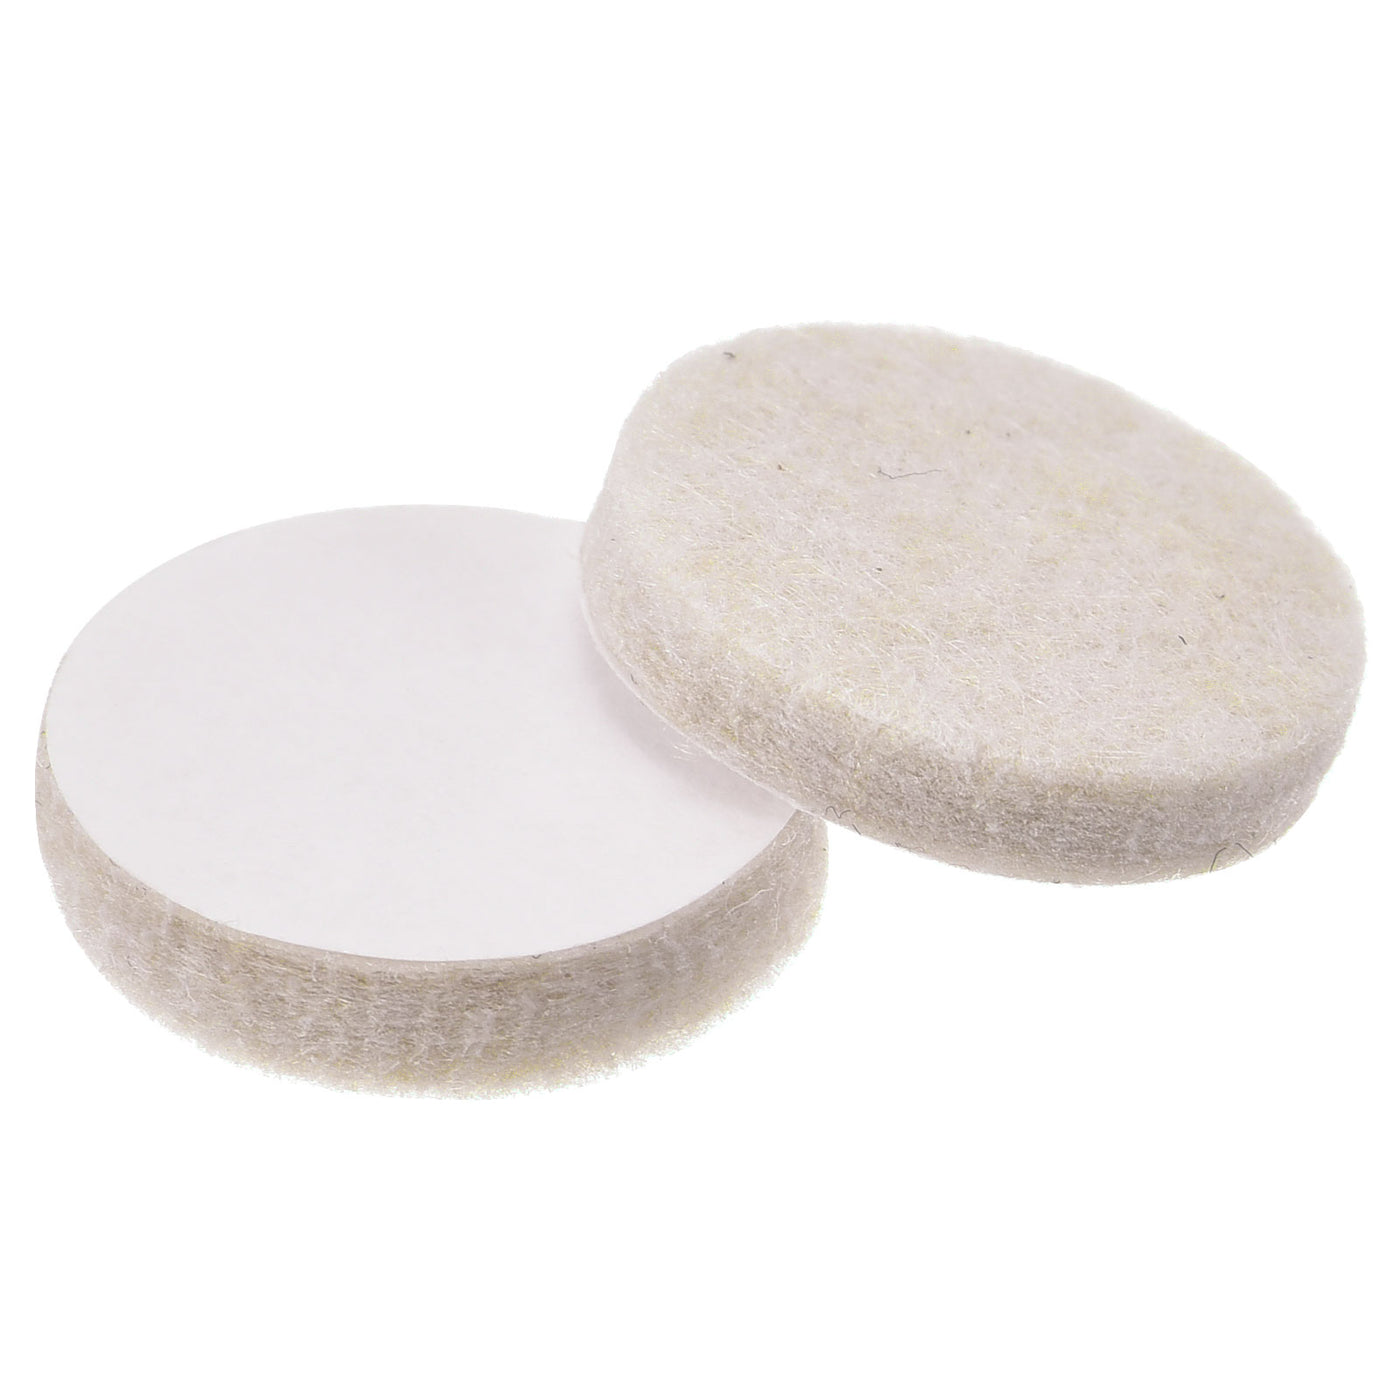 uxcell Uxcell Felt Furniture Pads 20mm Dia Self-stick Anti-scratch Floor Protector 50 Pads